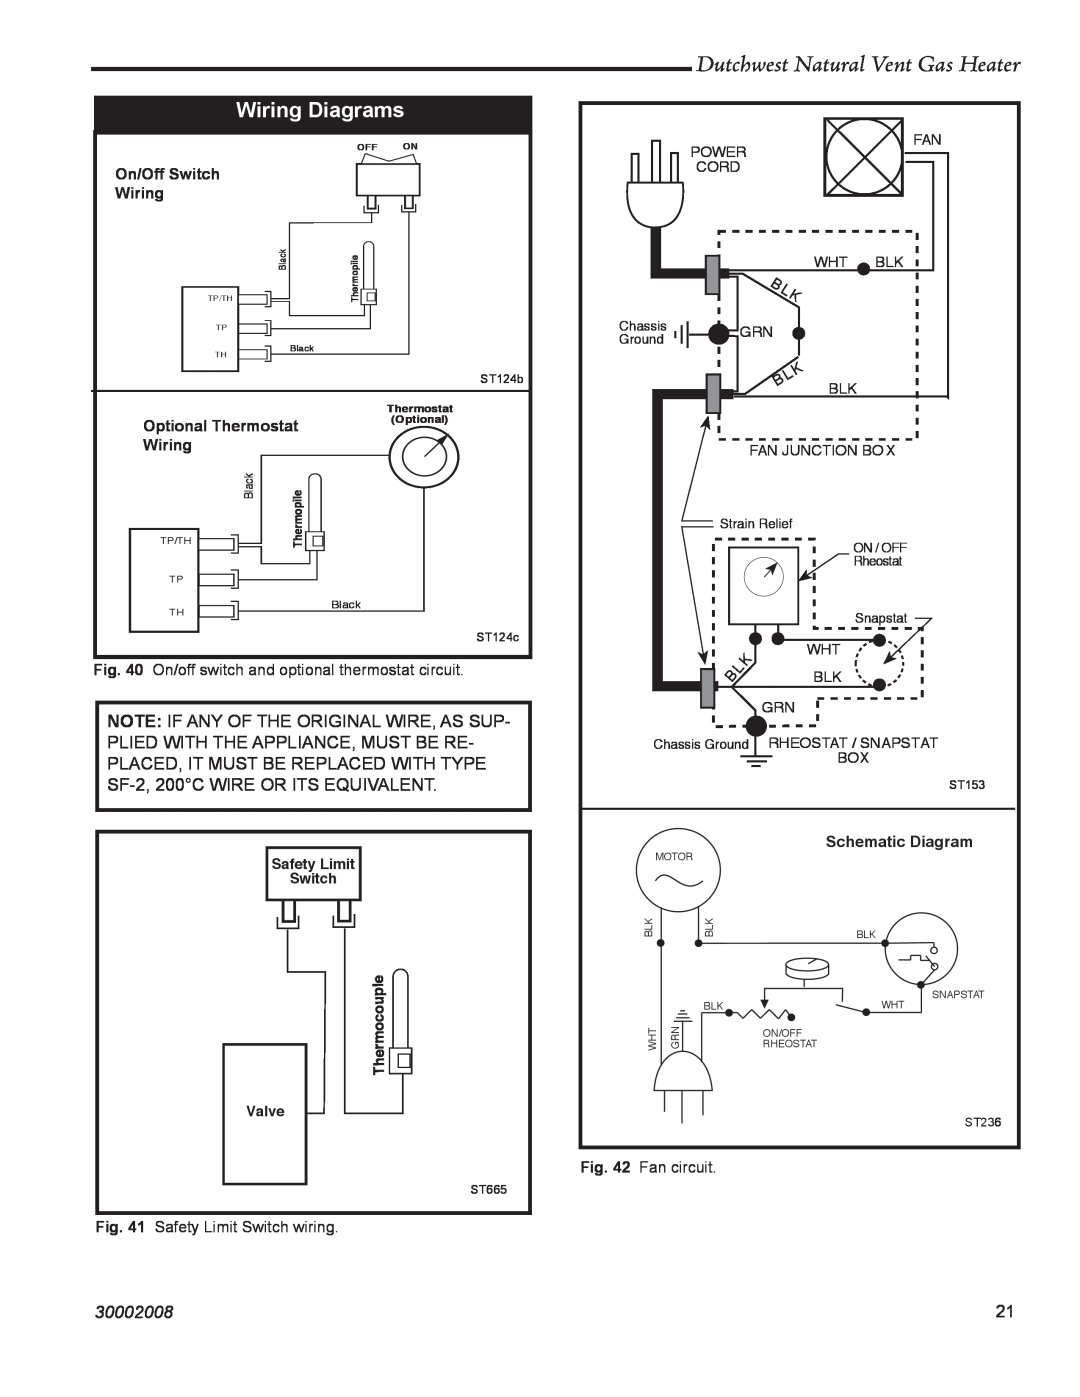 Vermont Casting 2468 Wiring Diagrams, Dutchwest Natural Vent Gas Heater, 30002008, Safety Limit Switch wiring, Fan circuit 